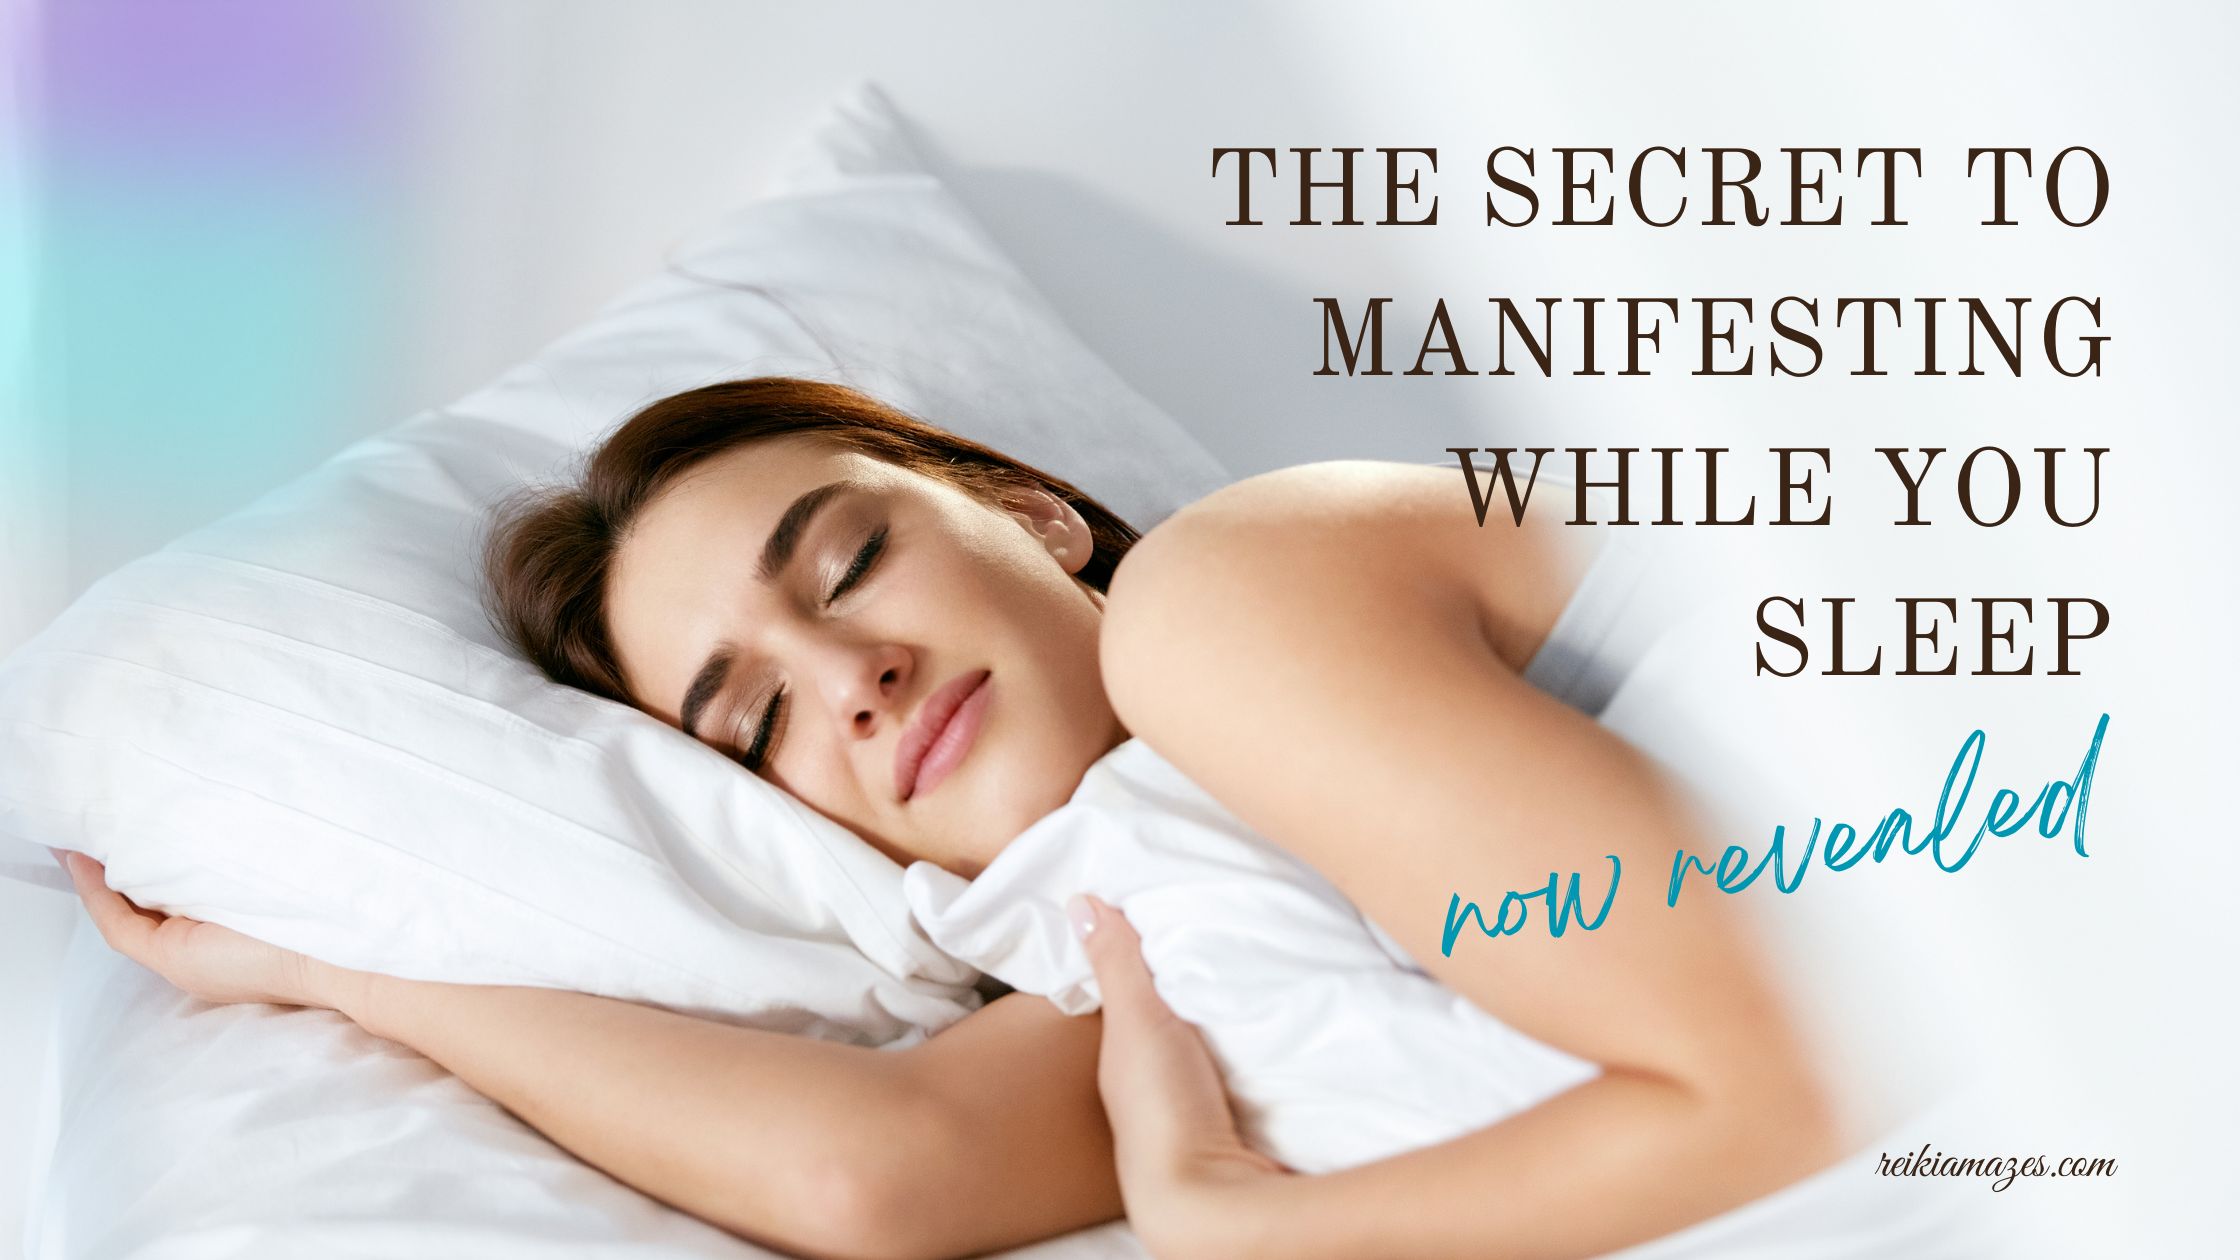 Visualize Your Way to Success: The Secret to Manifesting While You Sleep